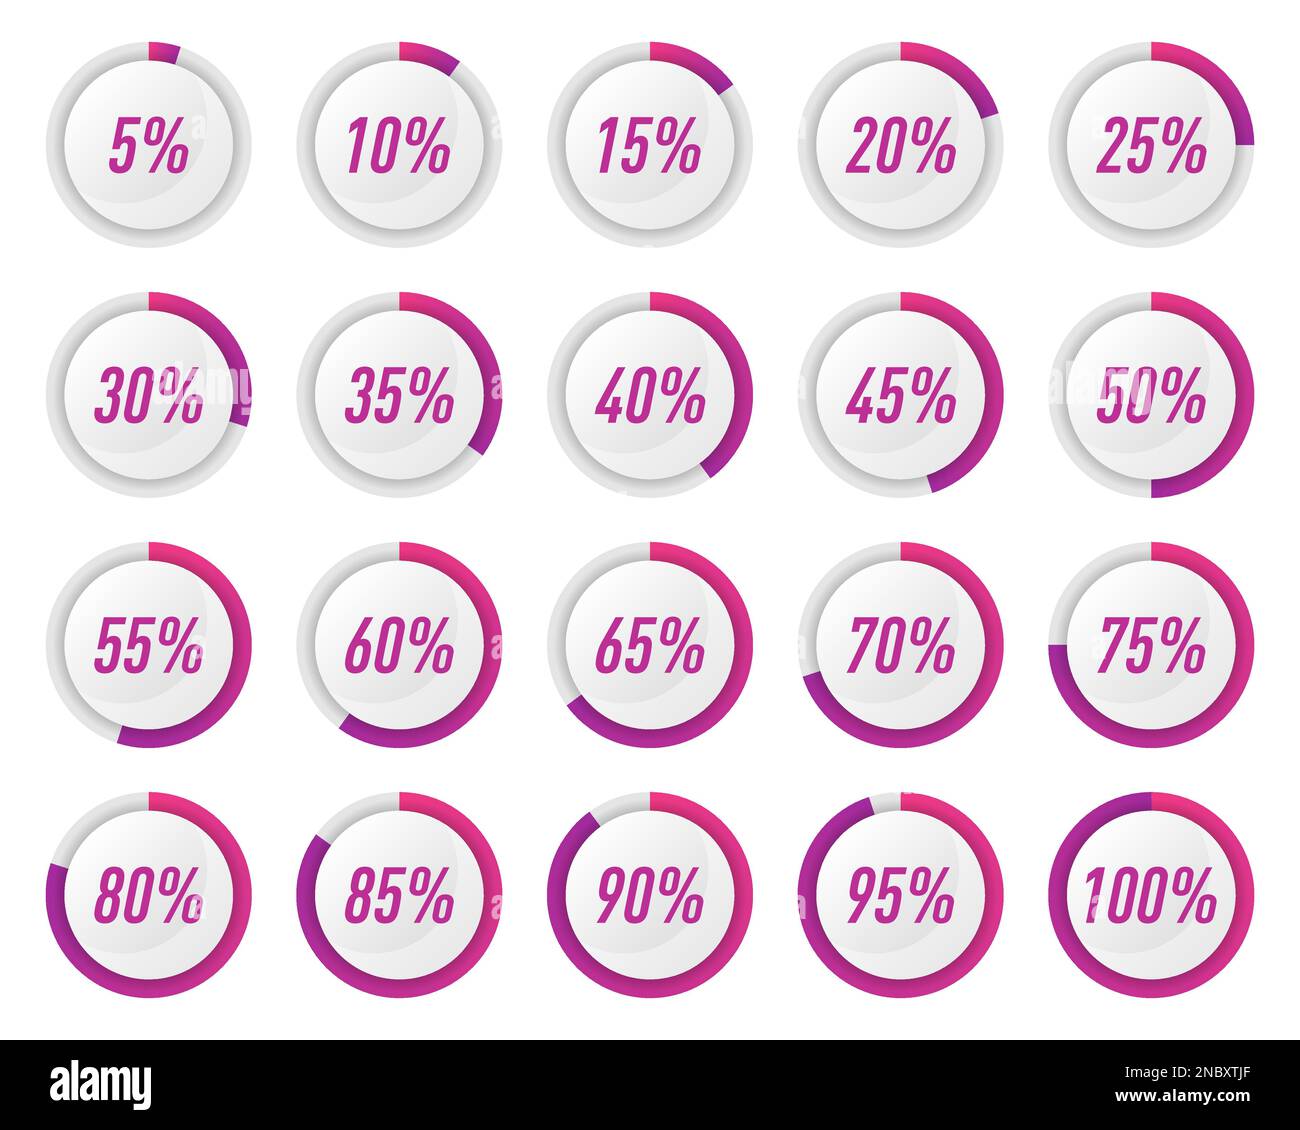 Collection of purple circle percentage diagrams for infographics Stock Vector